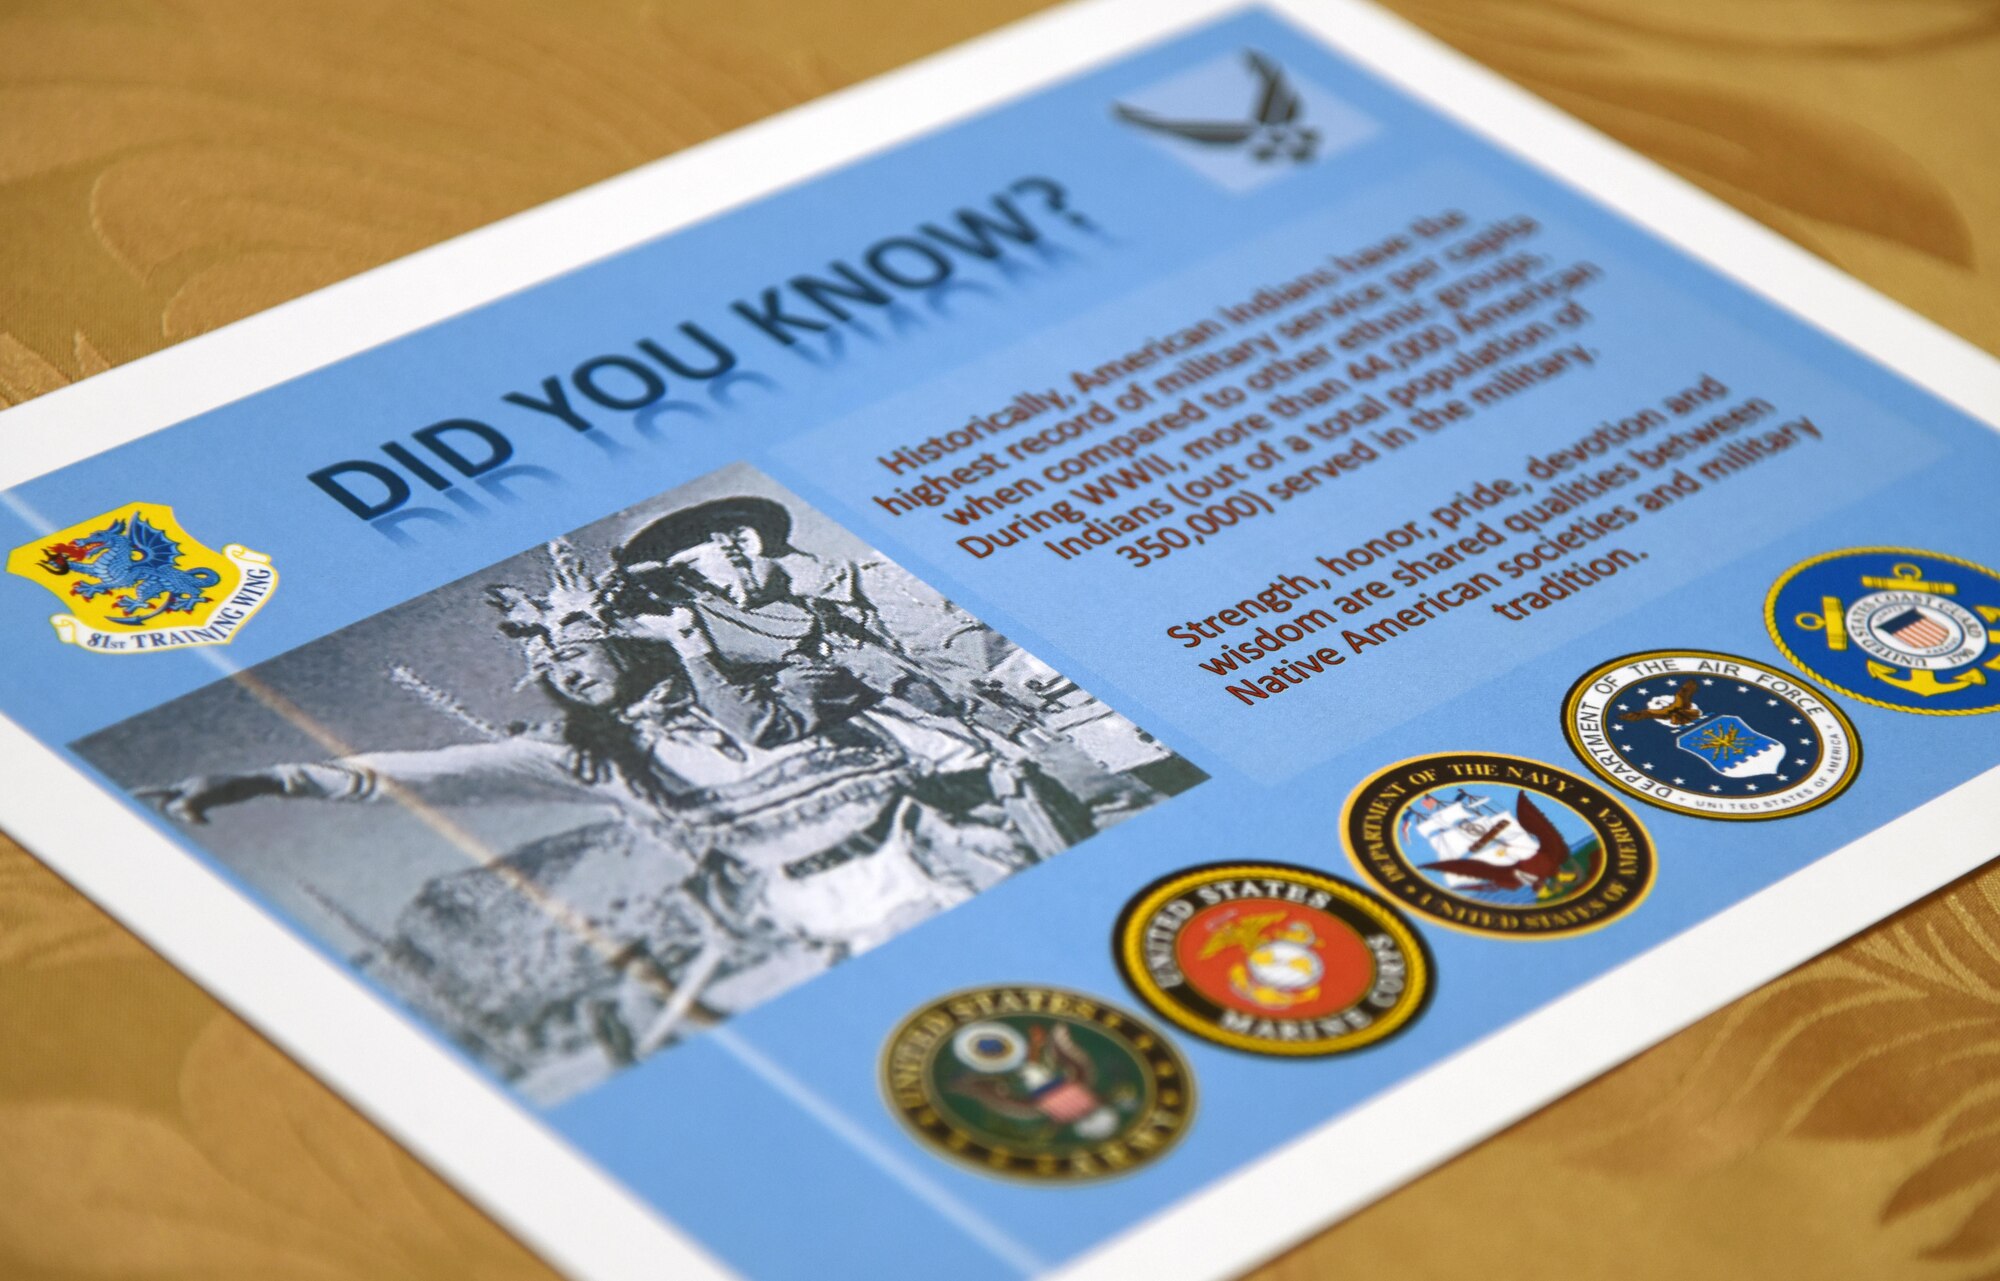 An educational print out is on display during the Native American Heritage Month food tasting at Keesler Air Force Base, Mississippi, Nov. 29, 2018. The event was held in celebration of Native American Heritage Month. (U.S. Air Force photo by Kemberly Groue)